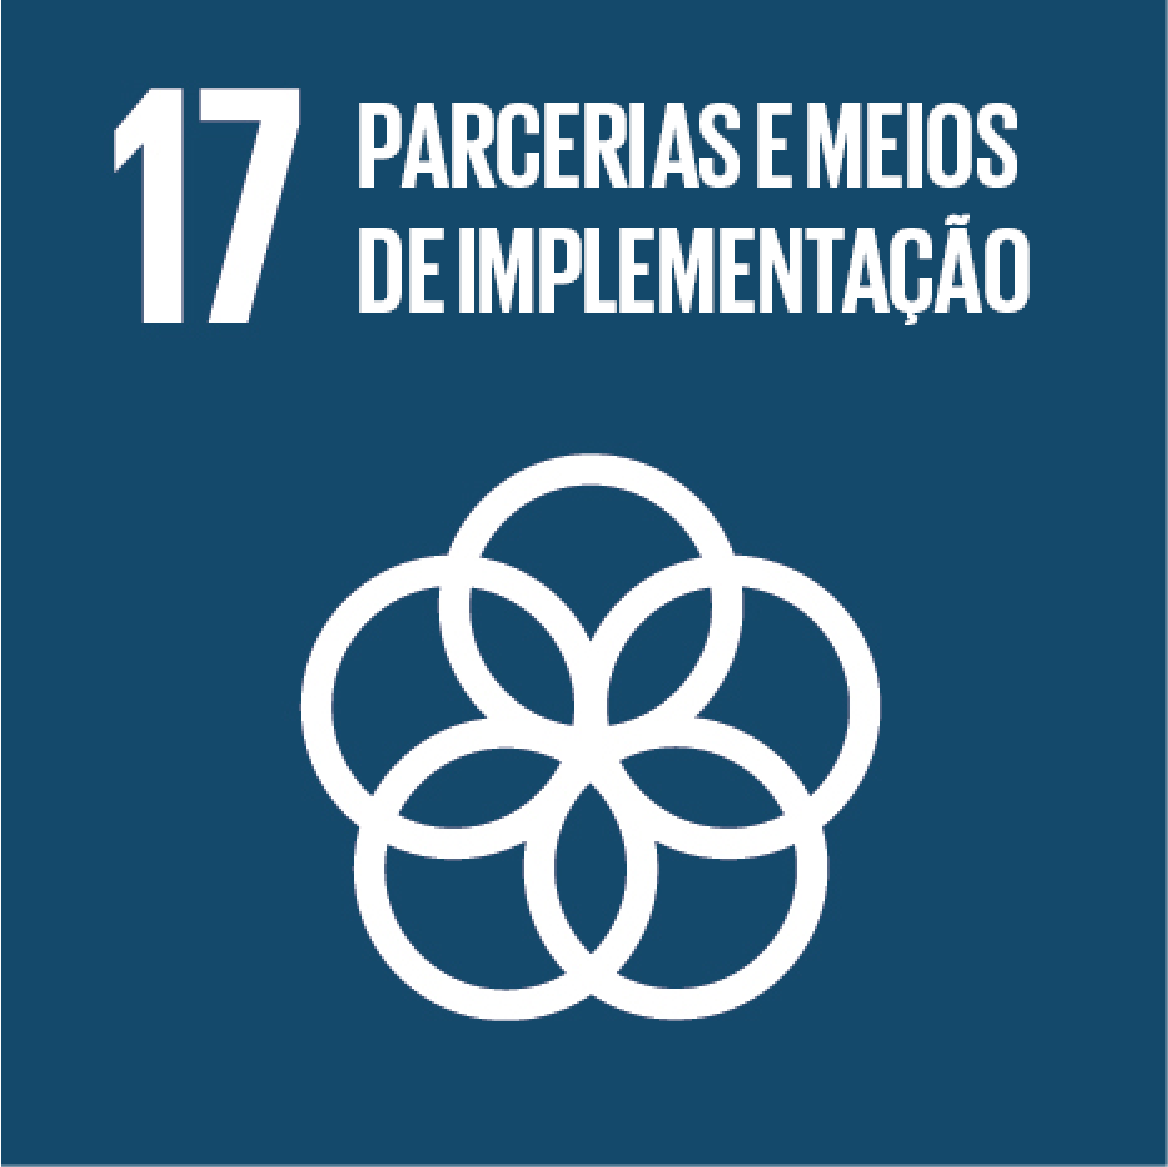 17. Partnerships and Means of Implementation: